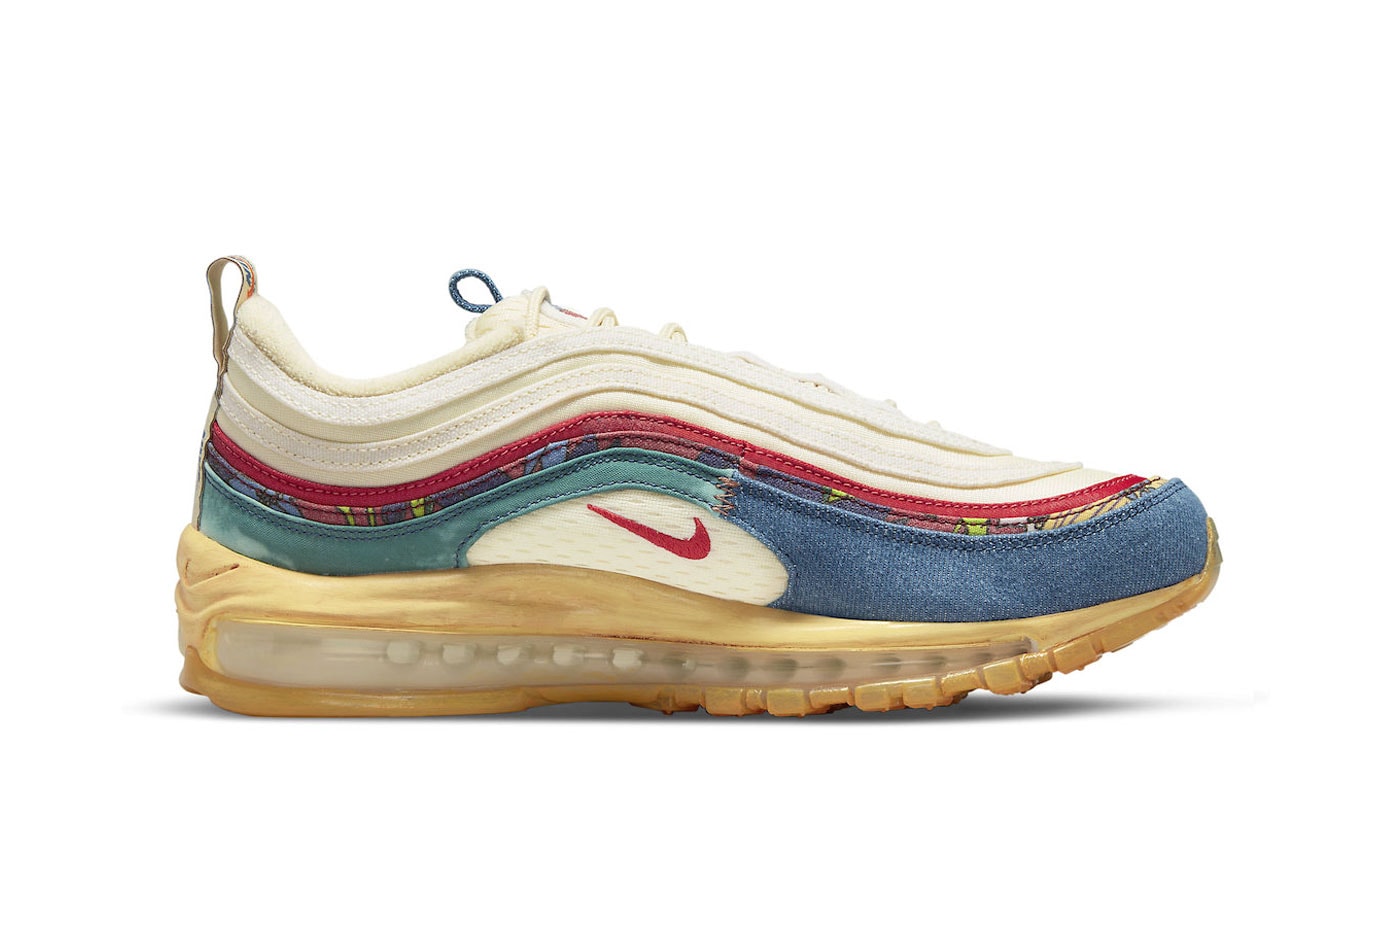 Nike Air Max 97 Coconut Milk Fossil Official Look Release Info dv1486-162 Date Buy Price 